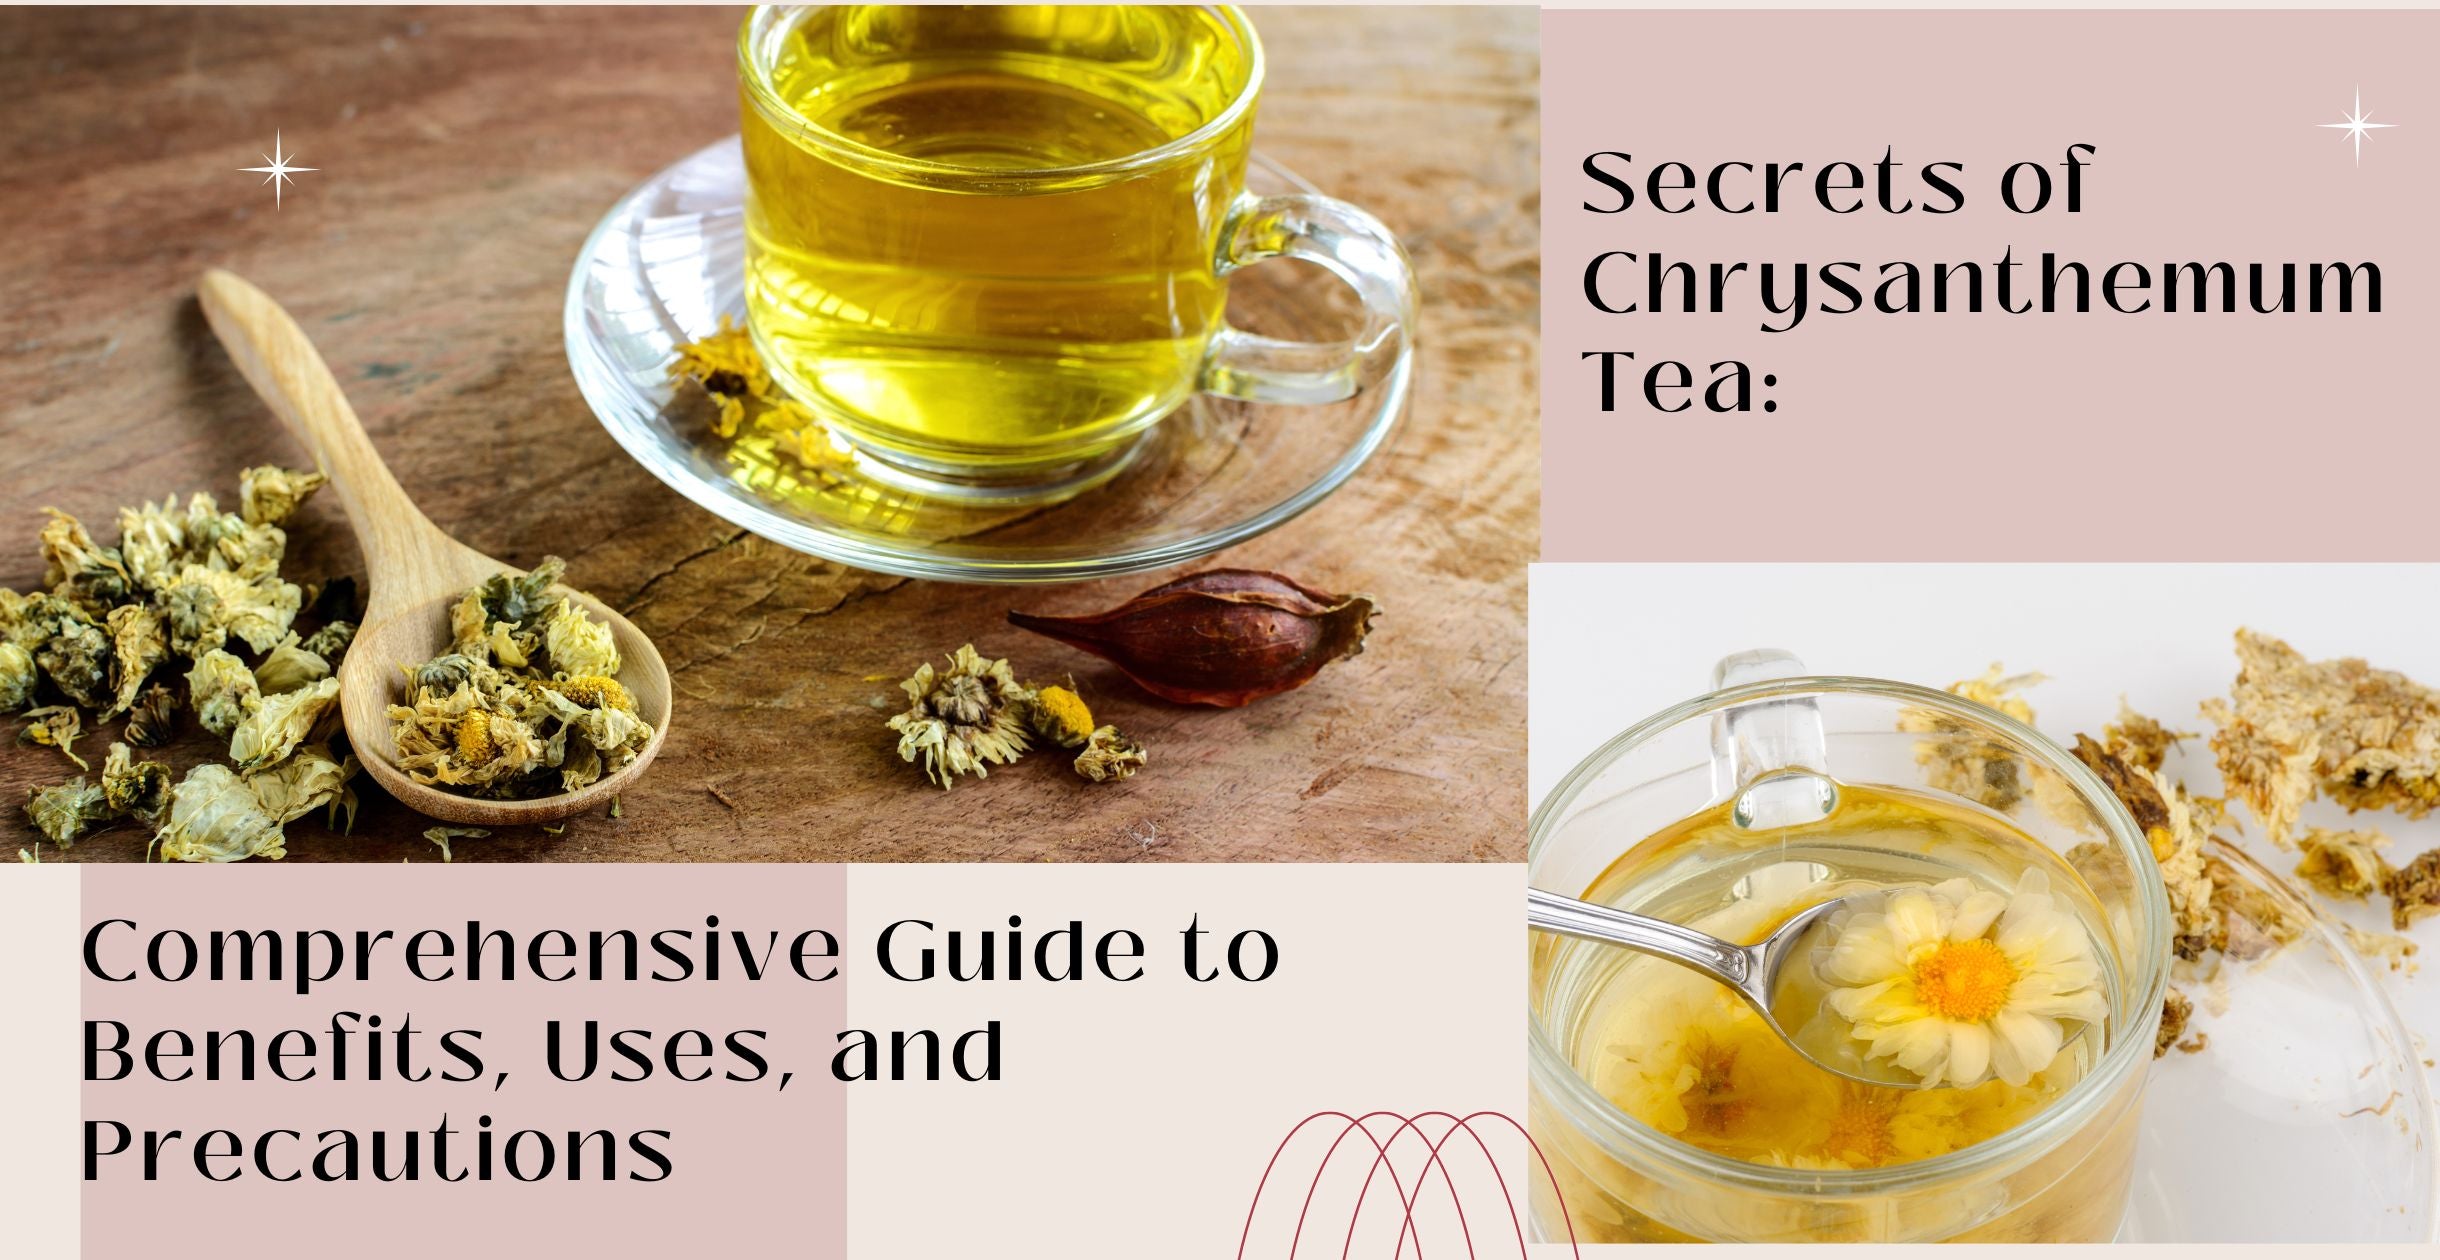 Secrets of Chrysanthemum Tea: Comprehensive Guide to Benefits, Uses, and Precautions